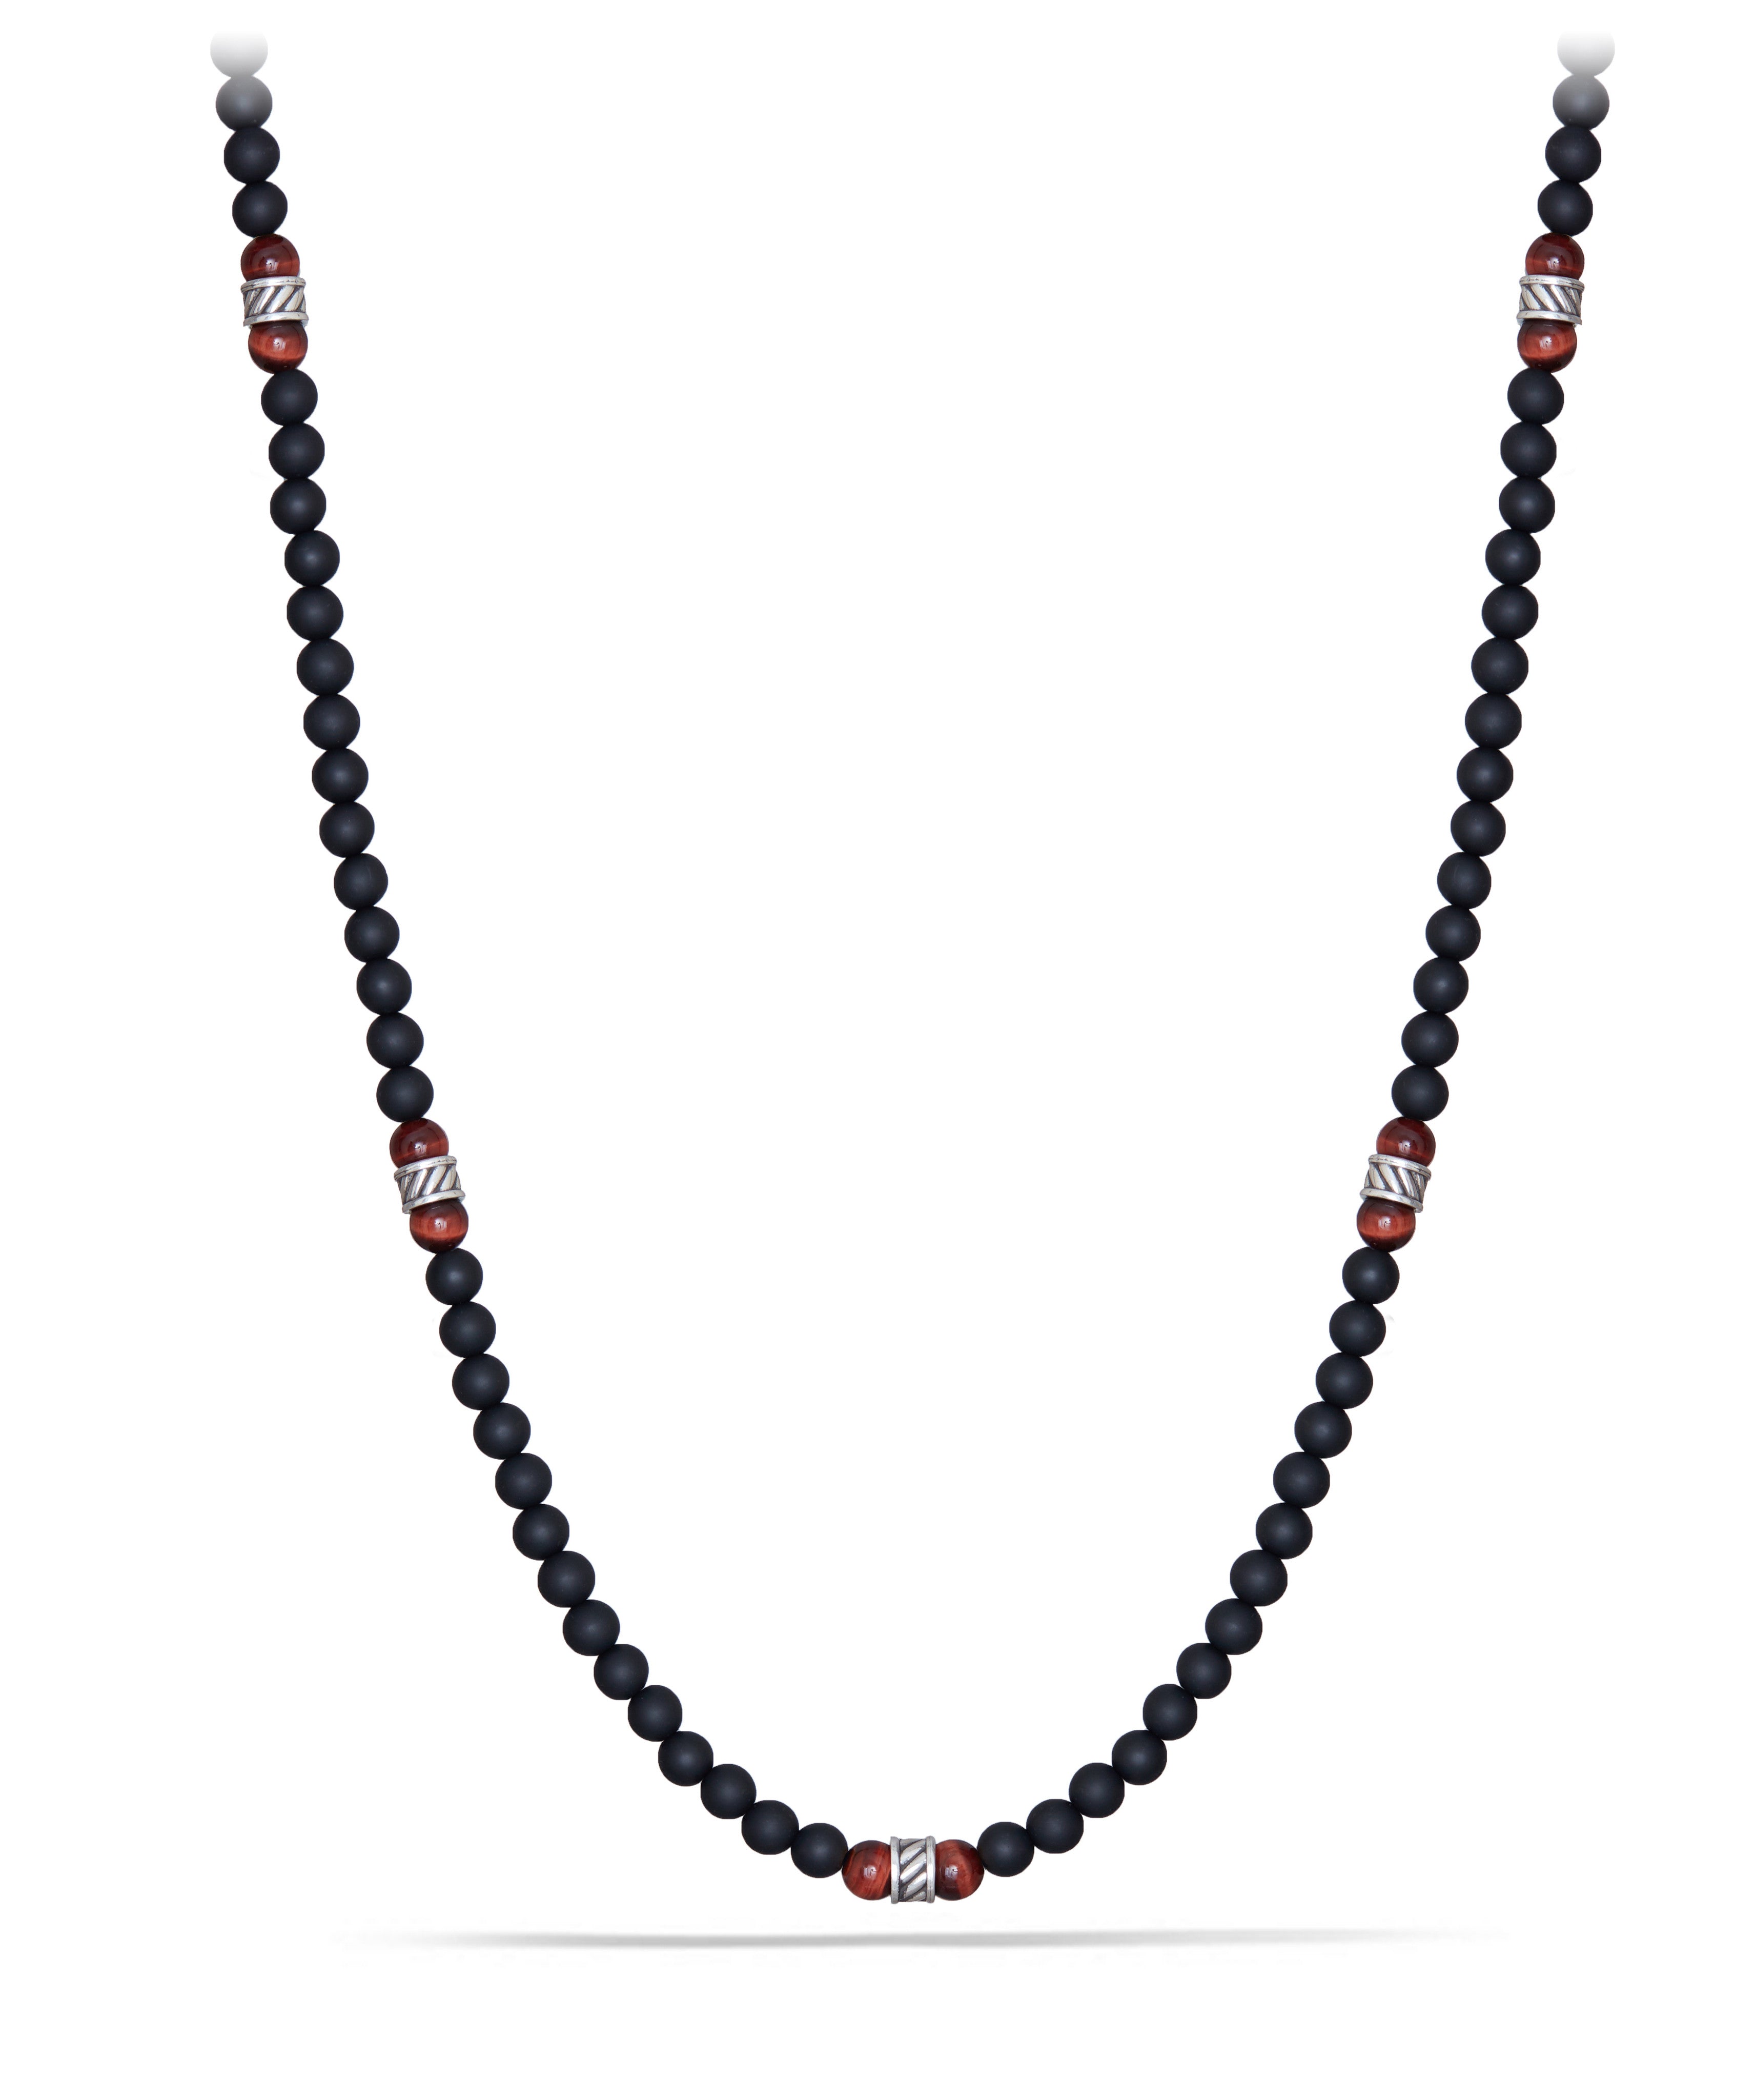 Spiritual Necklace with Forza, Red Tiger's Eye and Black Onyx